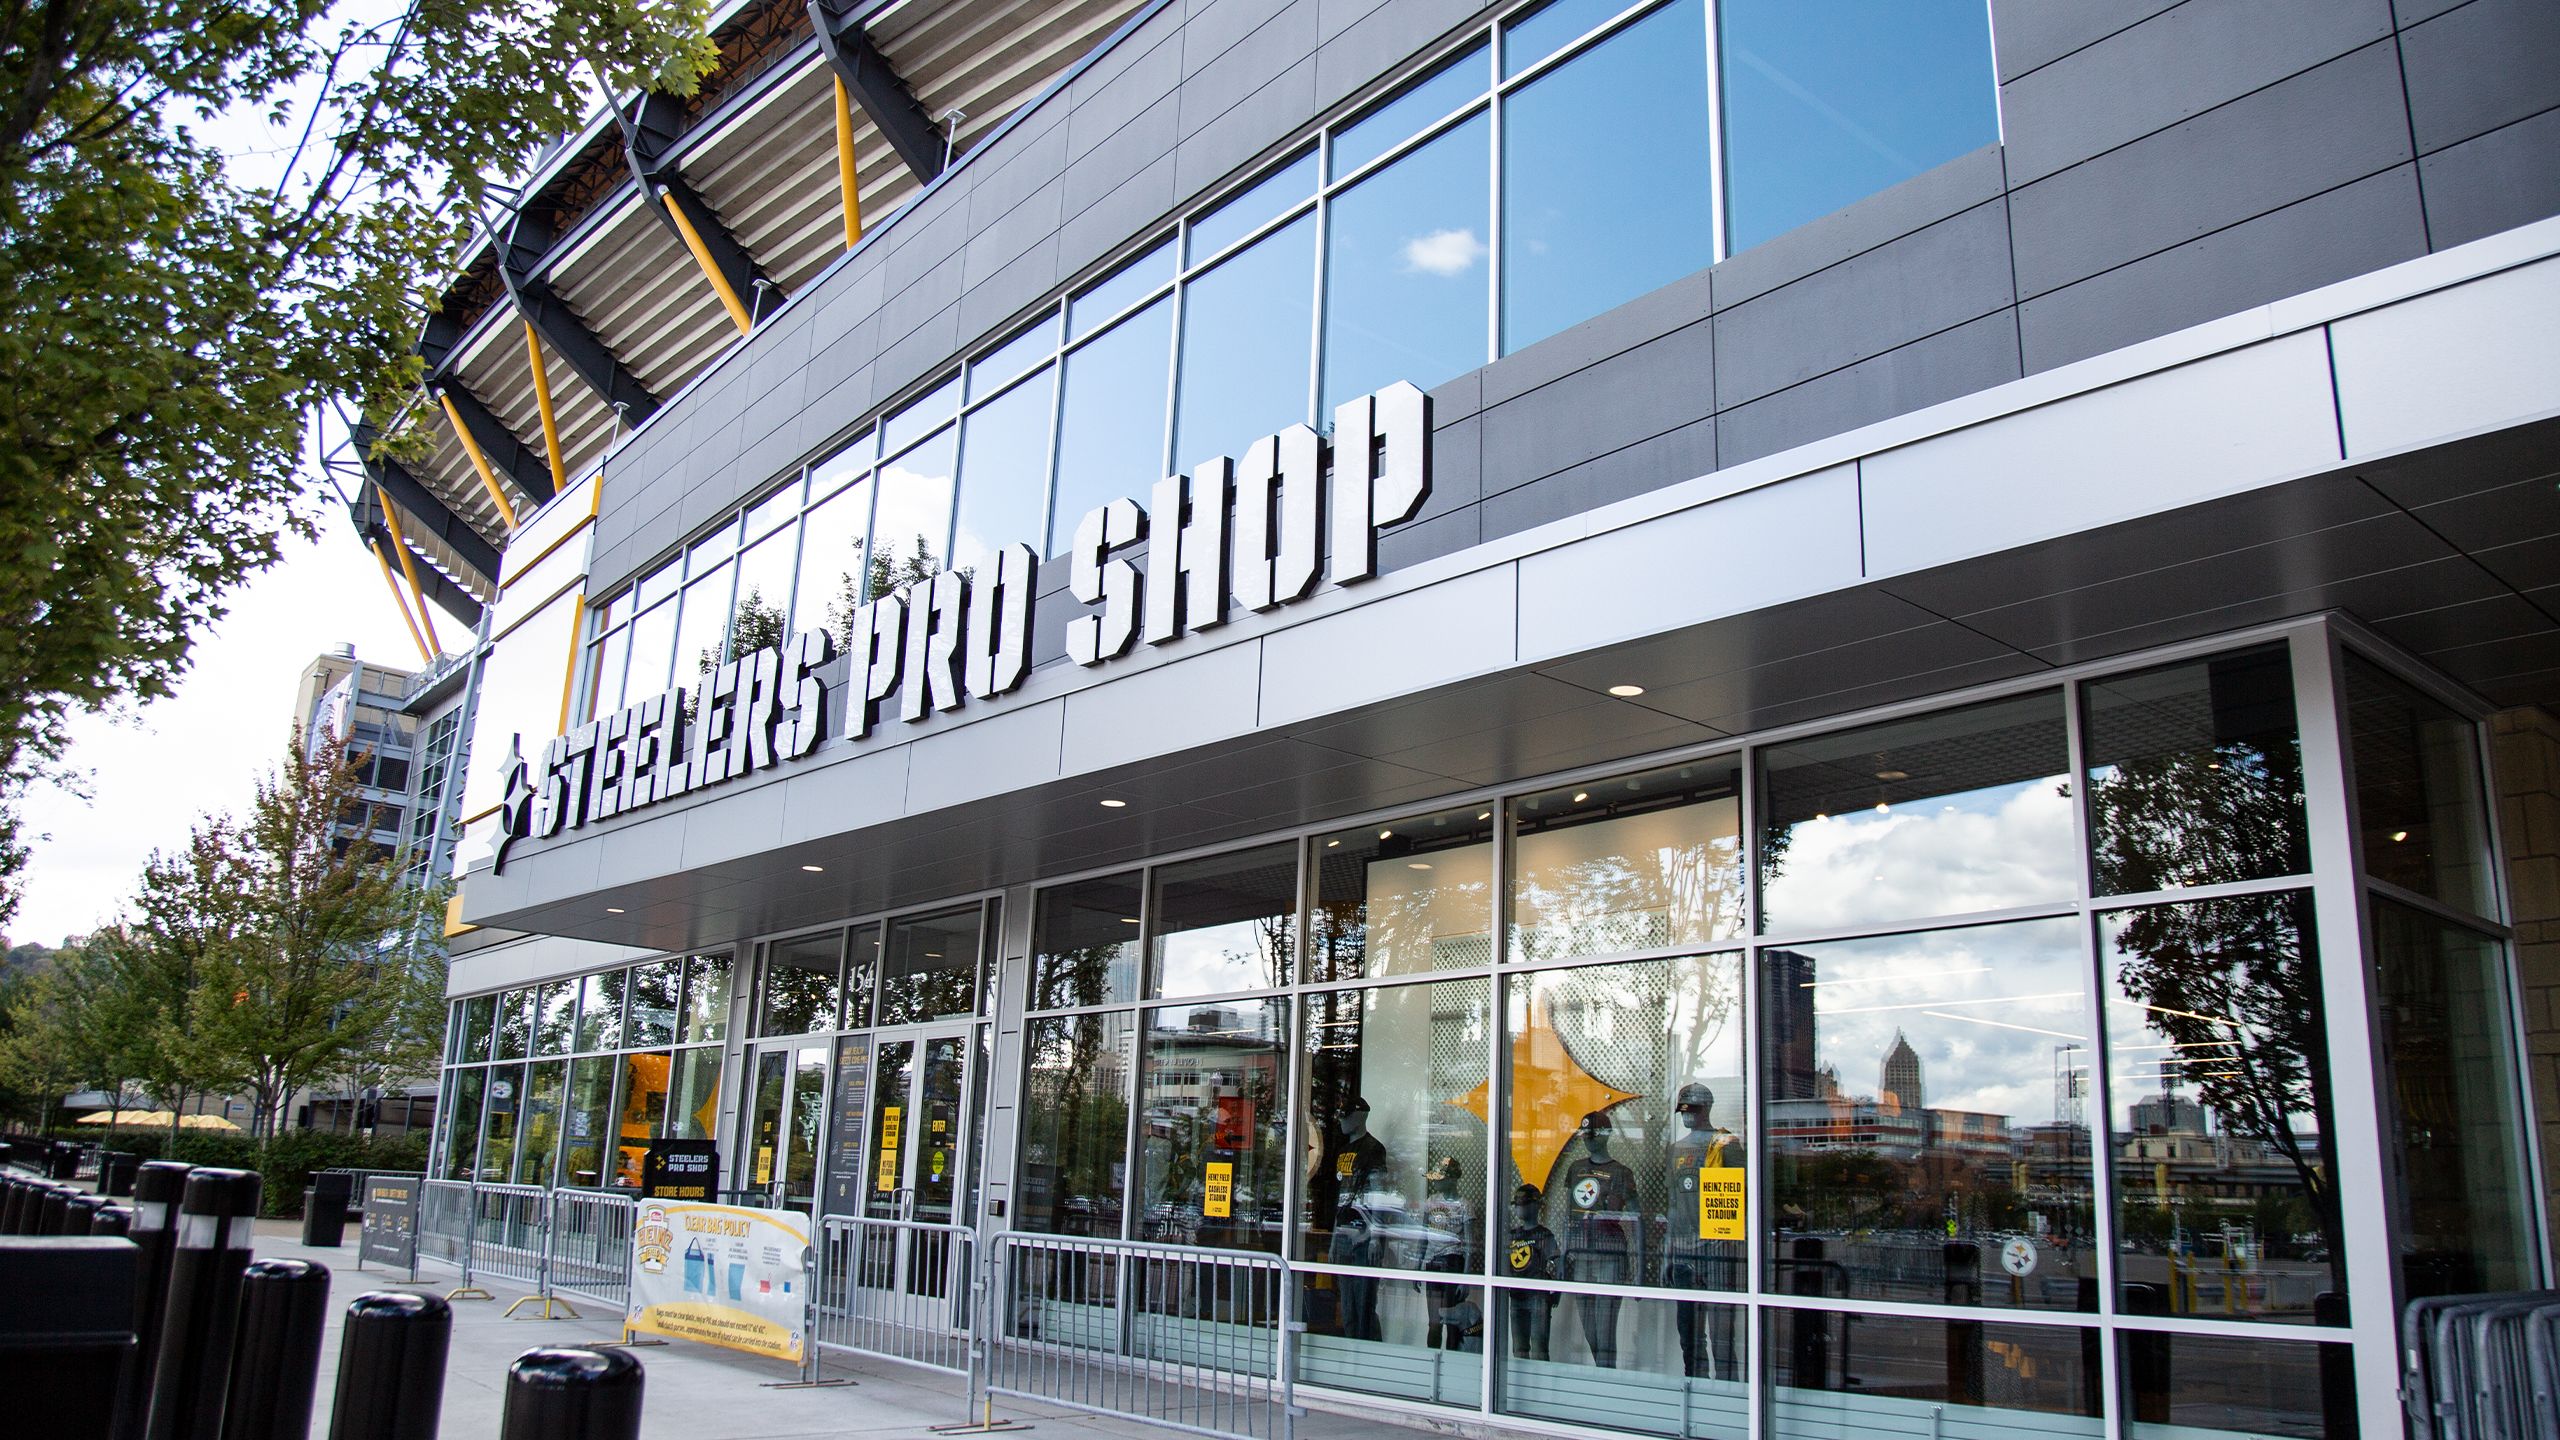 steelers official store